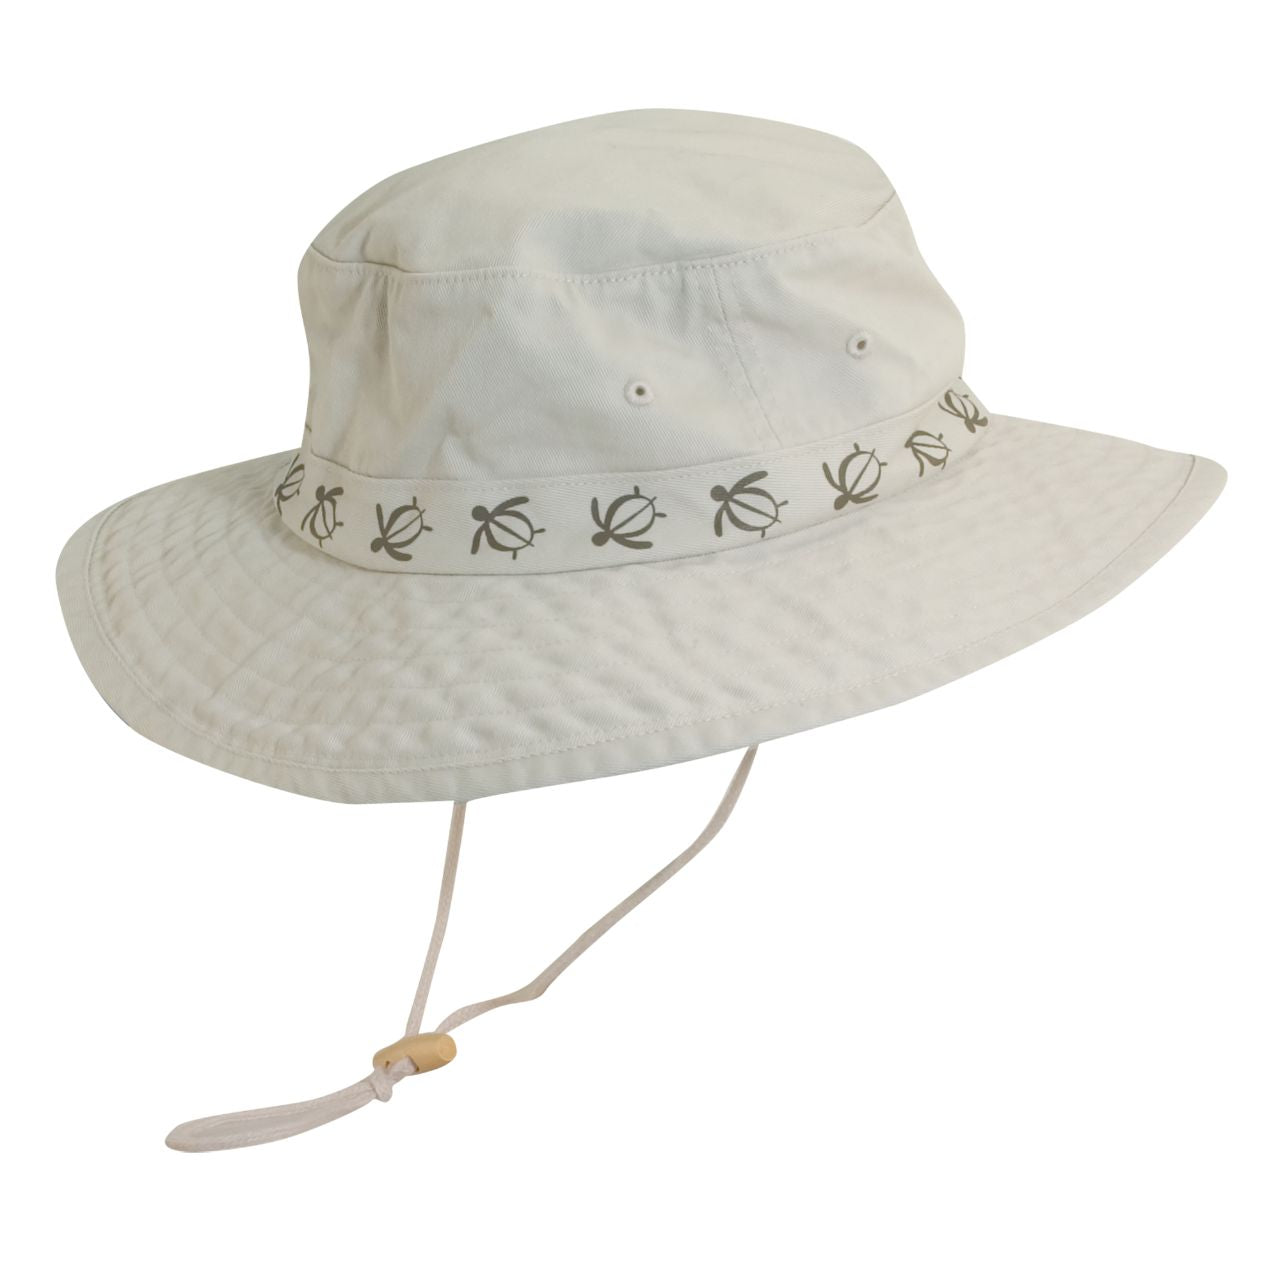 Cotton Boonie Hat with Turtle Tape Band - DPC Outdoor Hats Putty / Medium (57 cm)